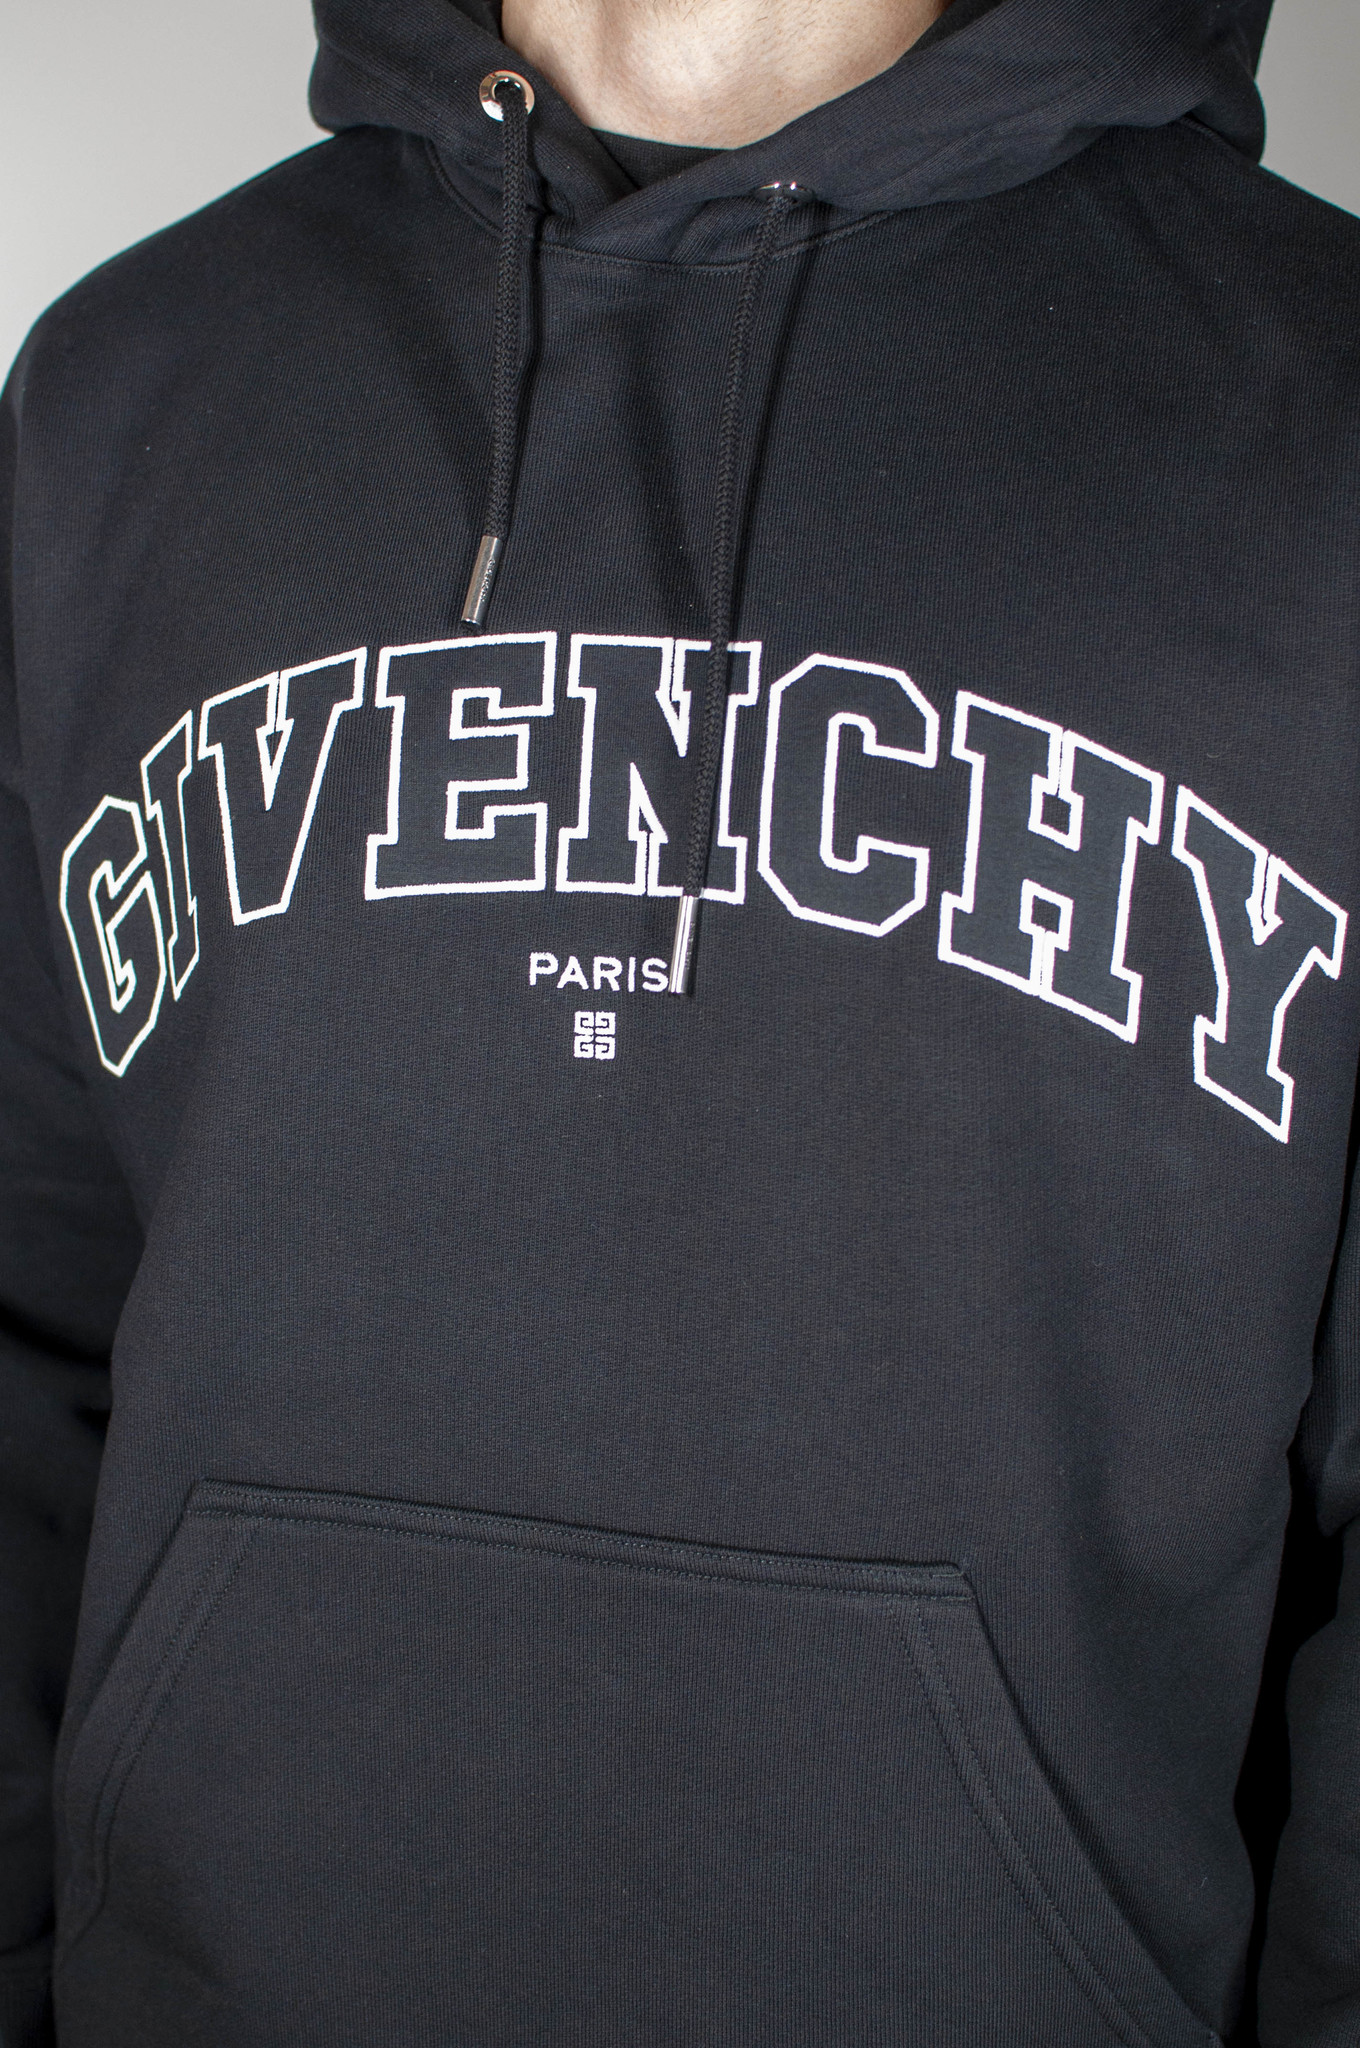 Gray College Sweater by Givenchy on Sale